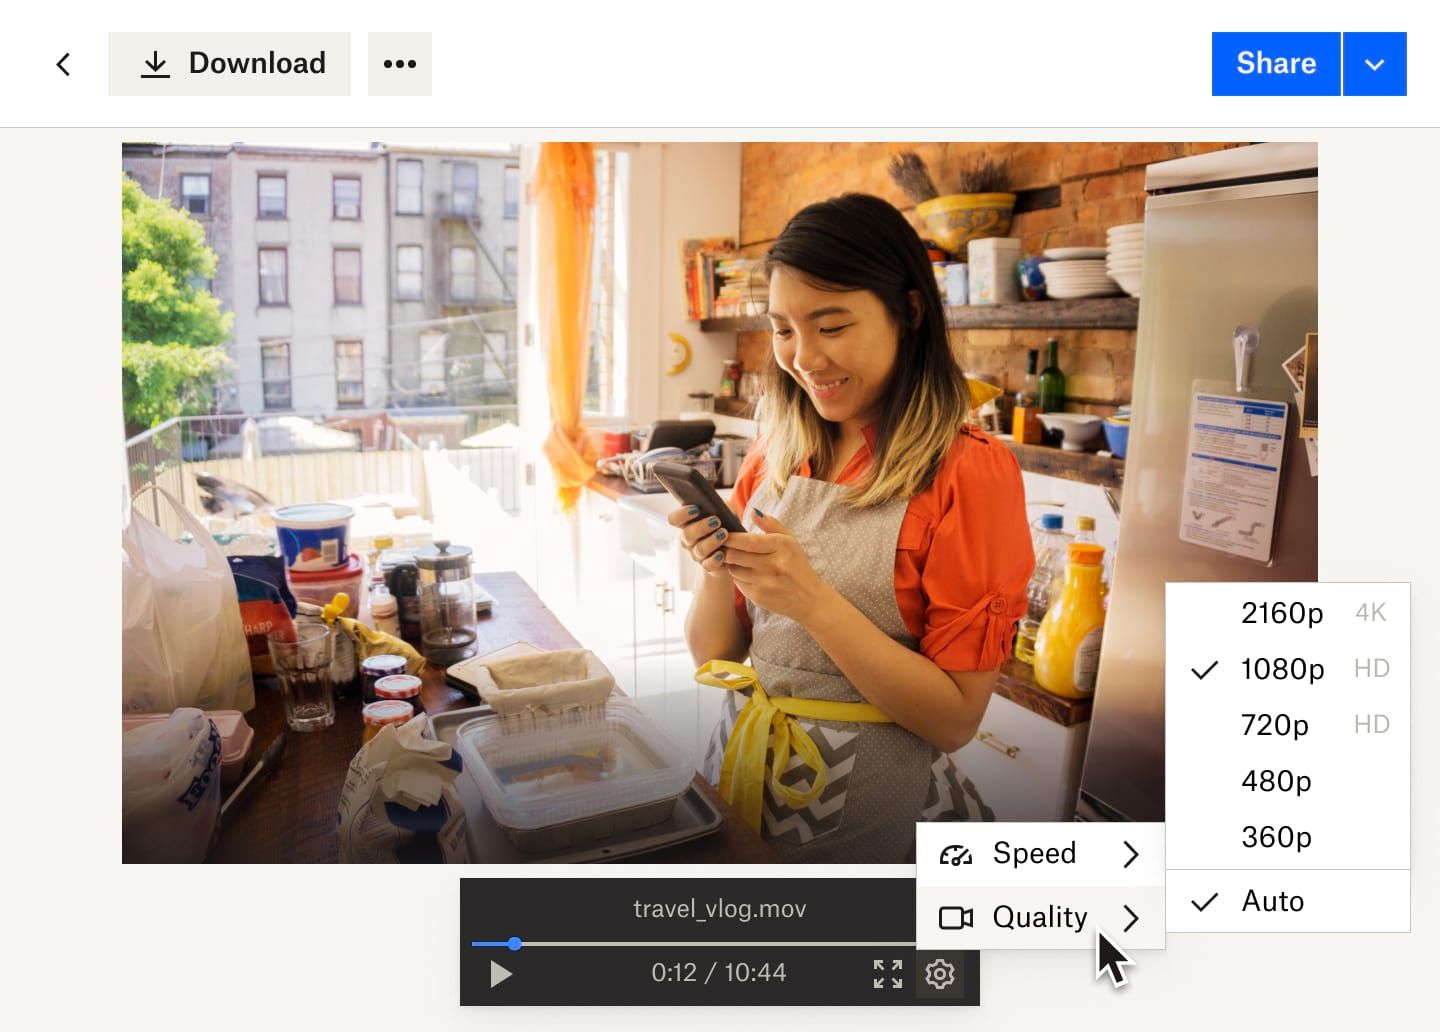 A drop down from the settings button shows video speed and video quality options for the Dropbox video file of a woman working in a bakery.